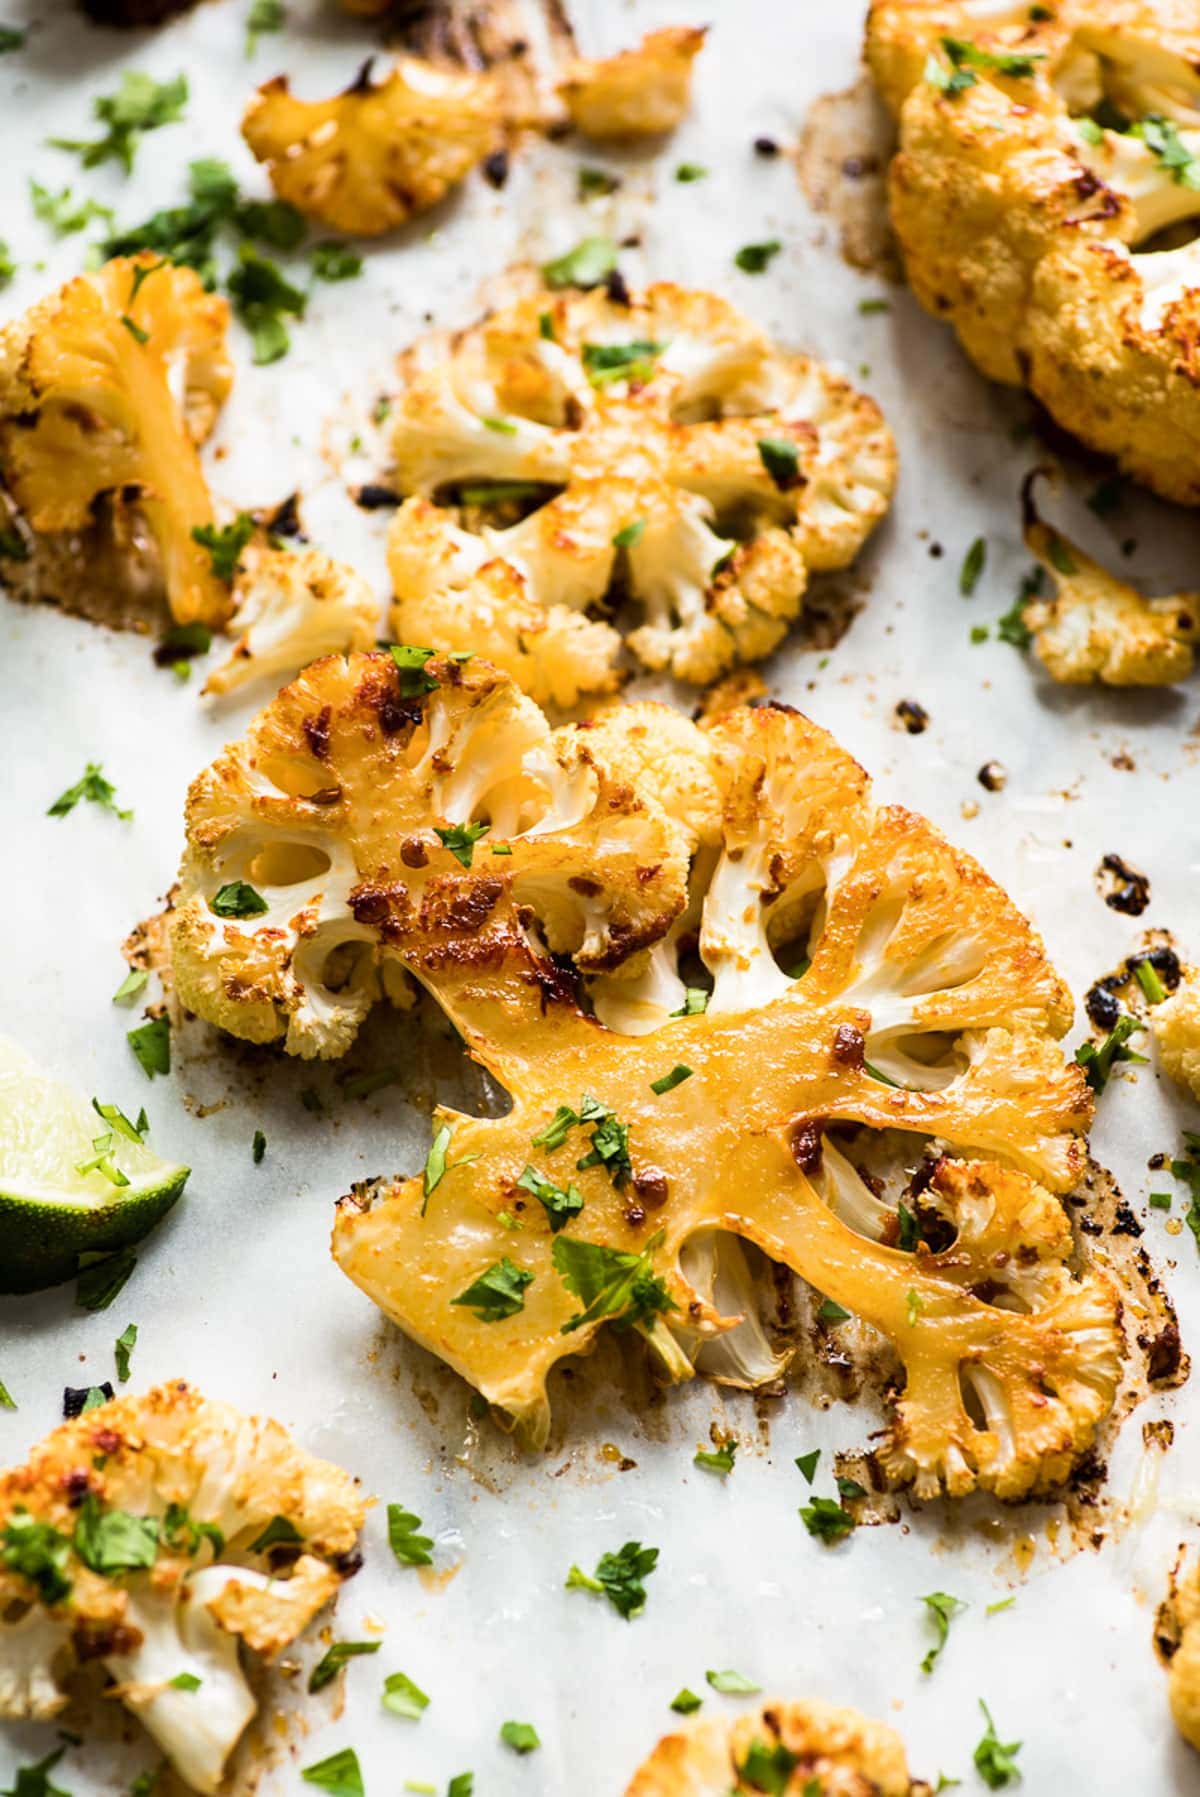 Spicy roasted cauliflower topped with cilantro and lime juice.